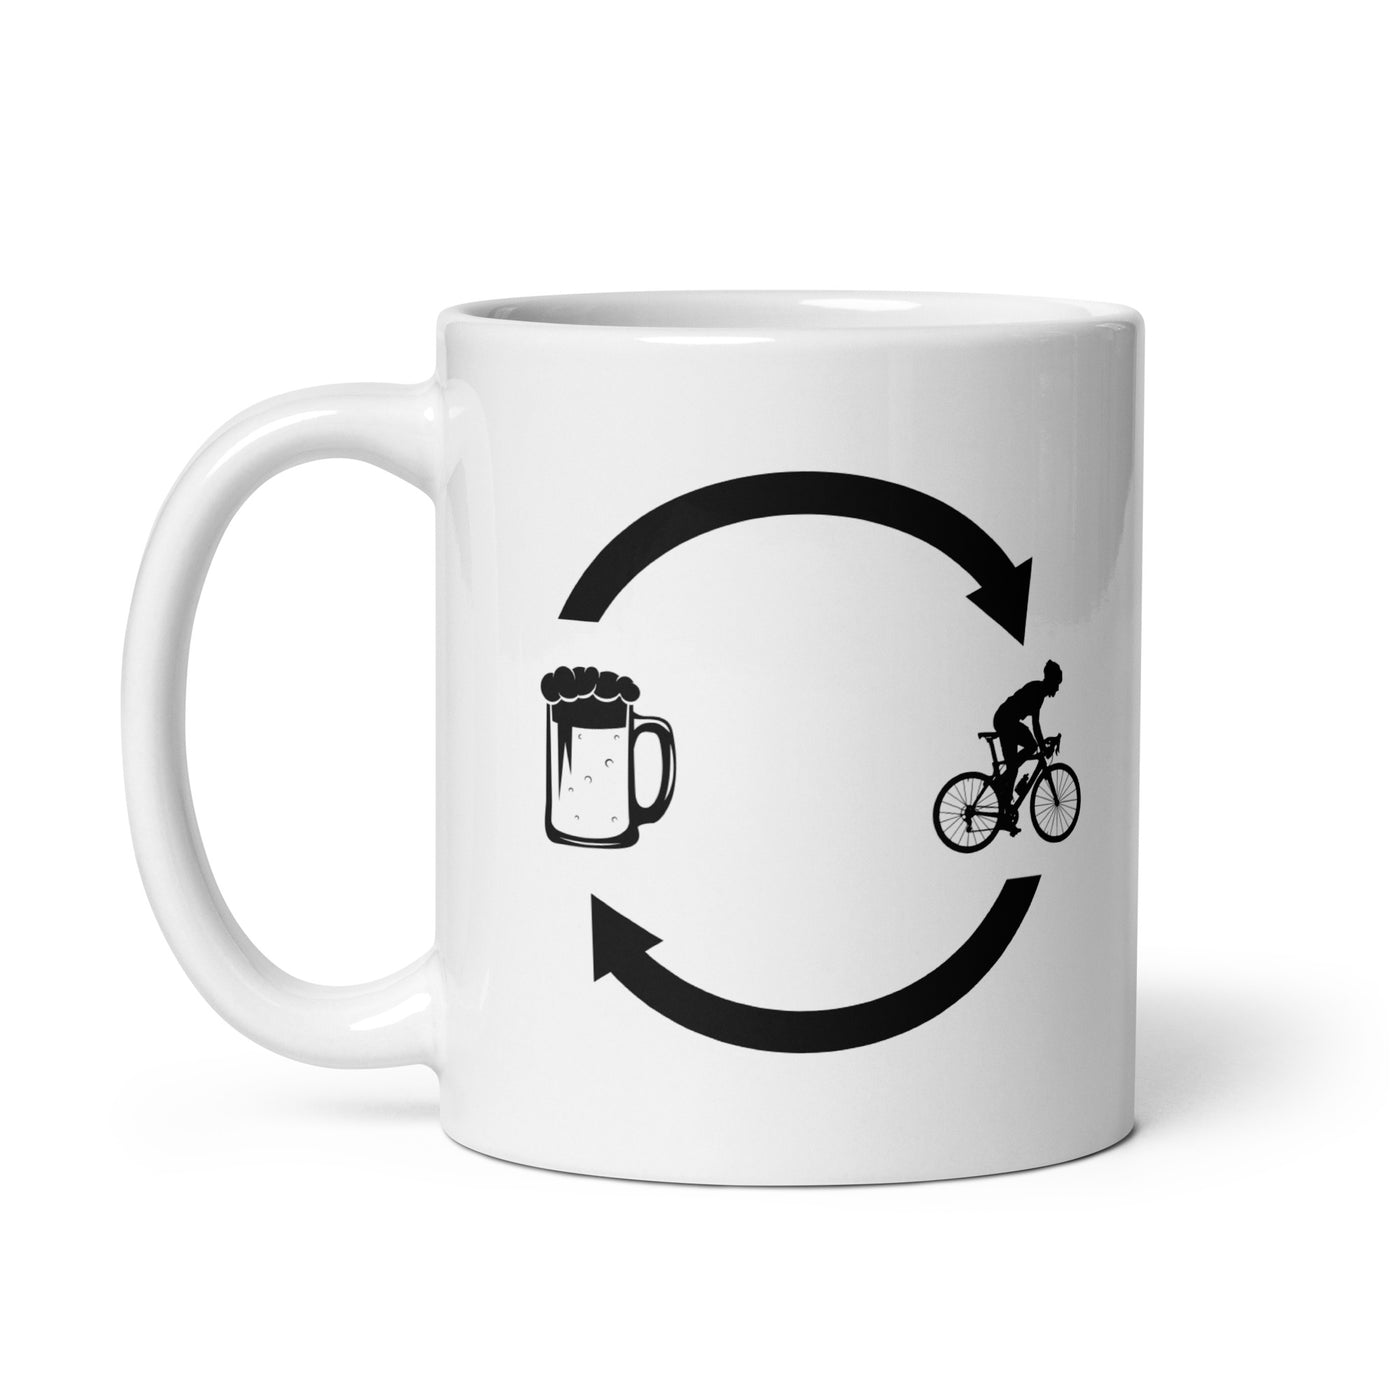 Beer Loading Arrows And Cycling 1 - Tasse fahrrad 11oz